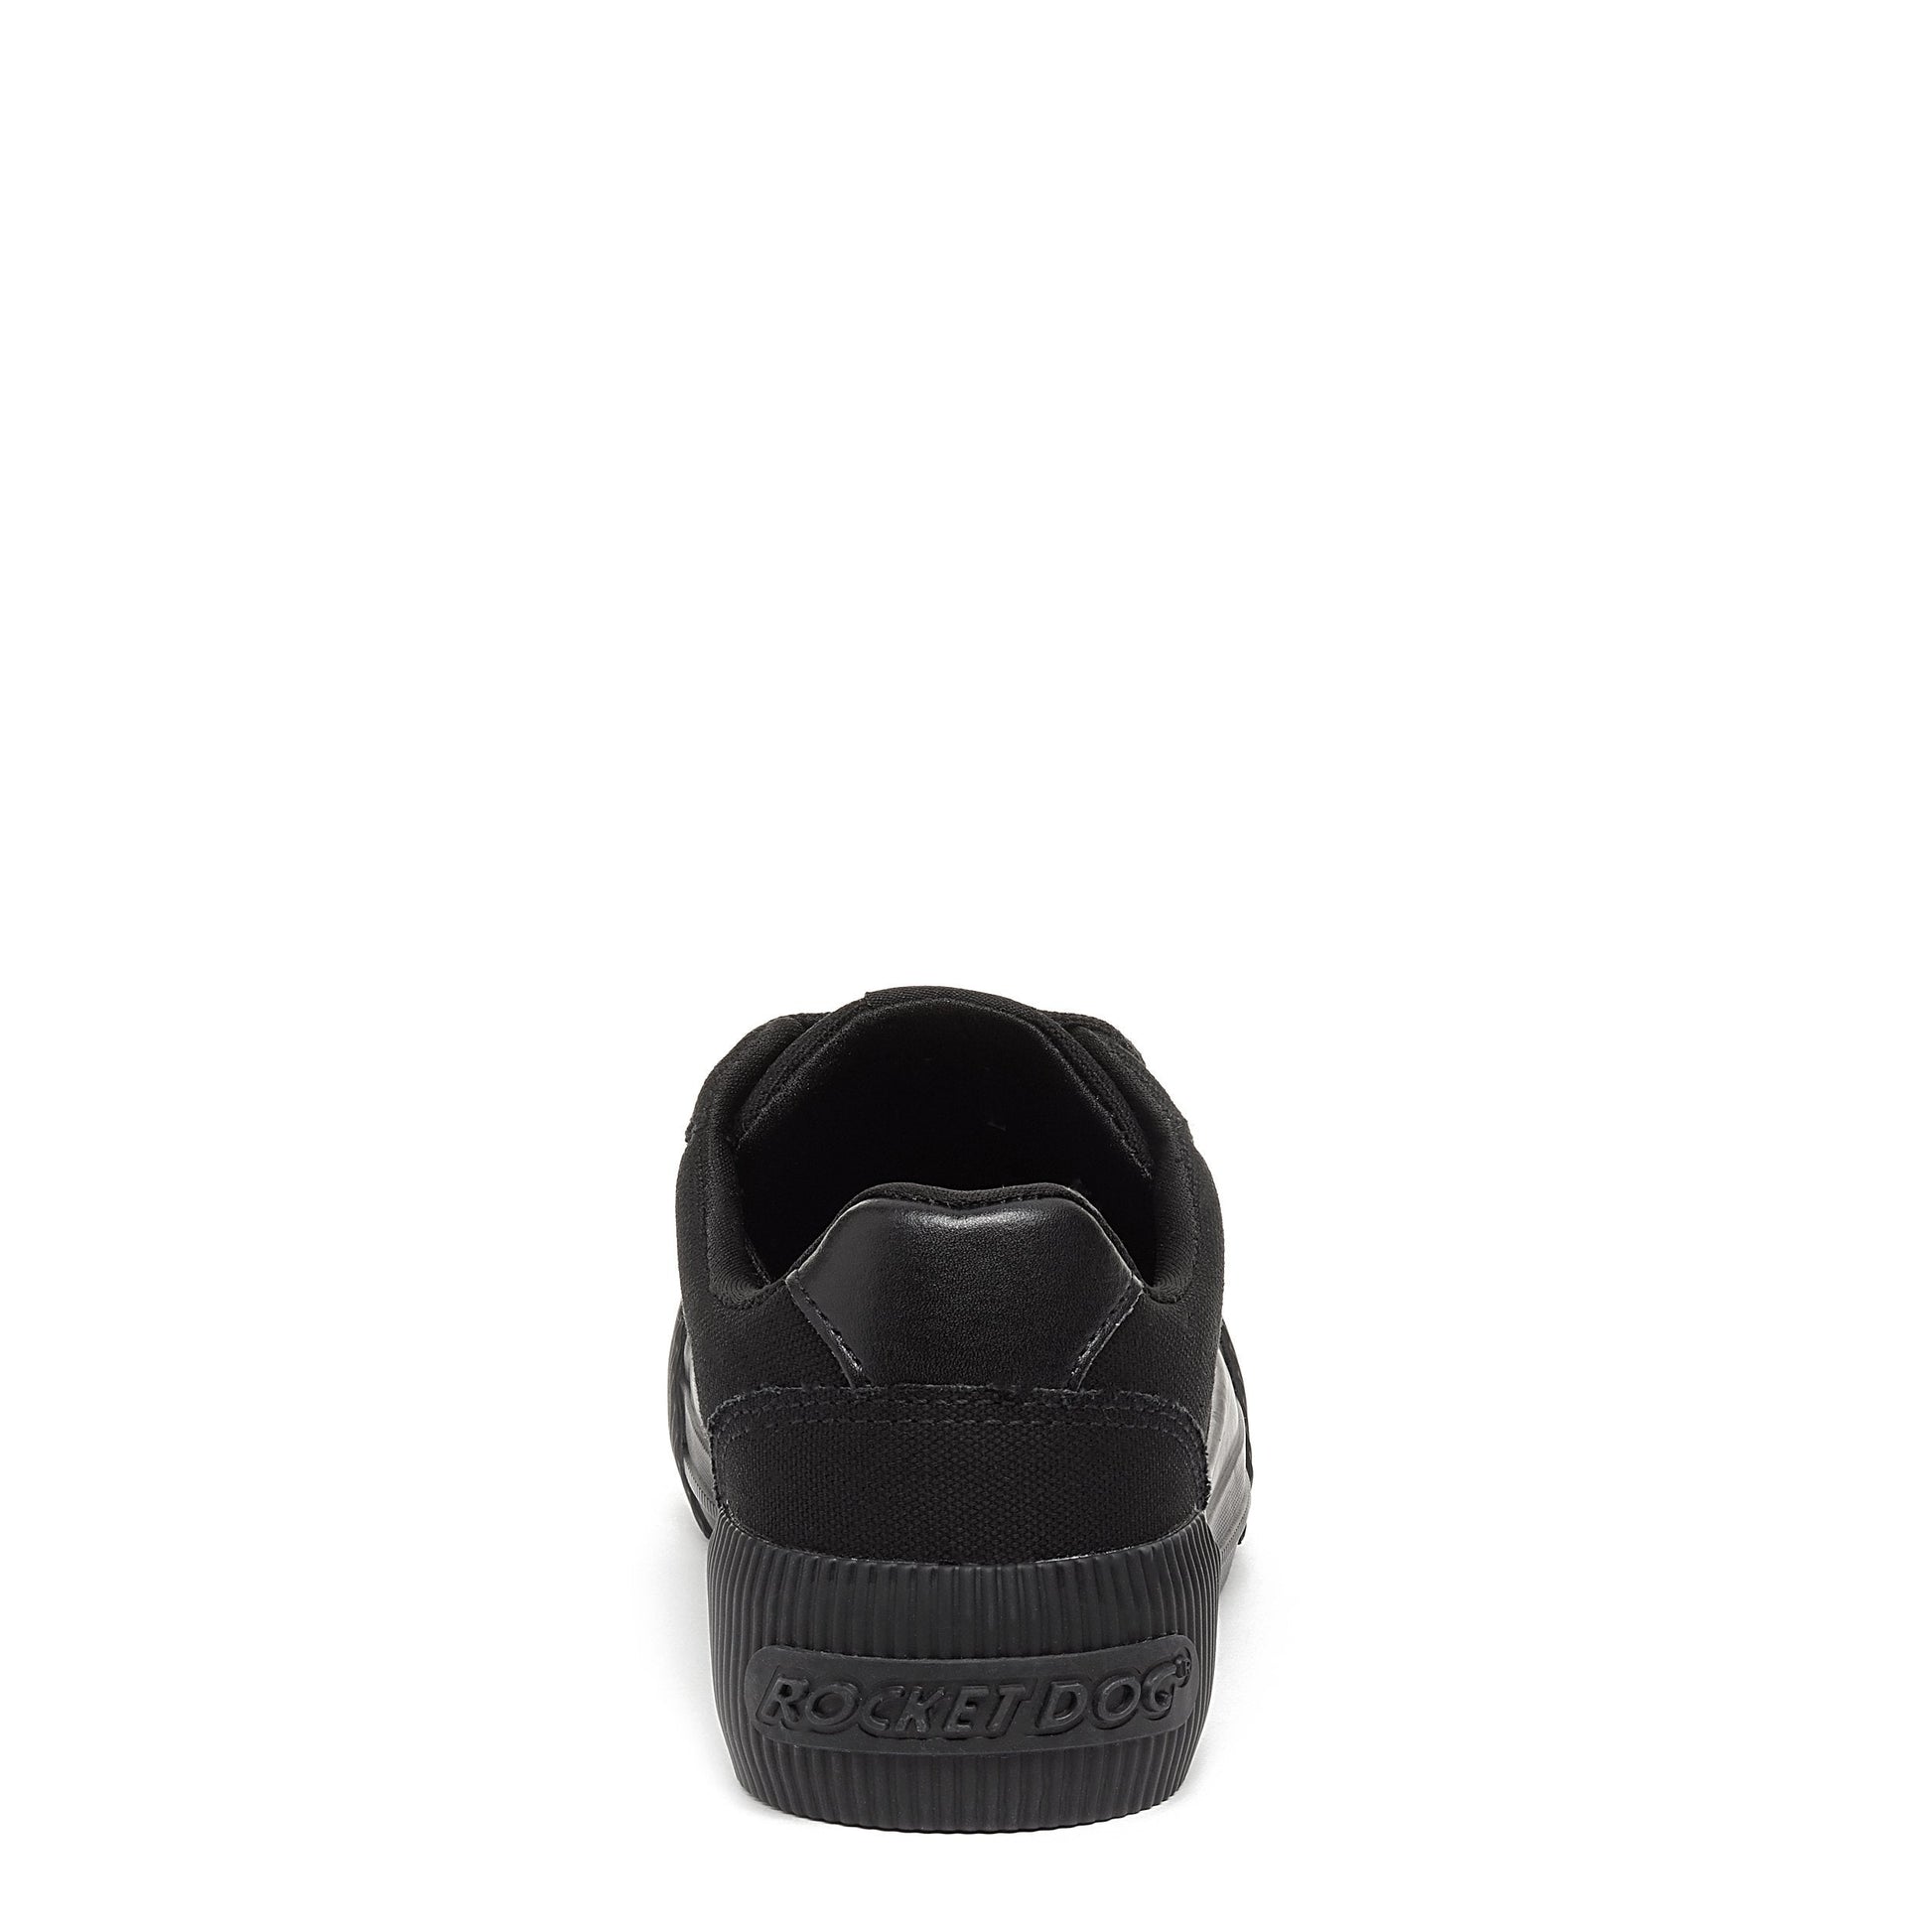 Cheery All Black Trainer